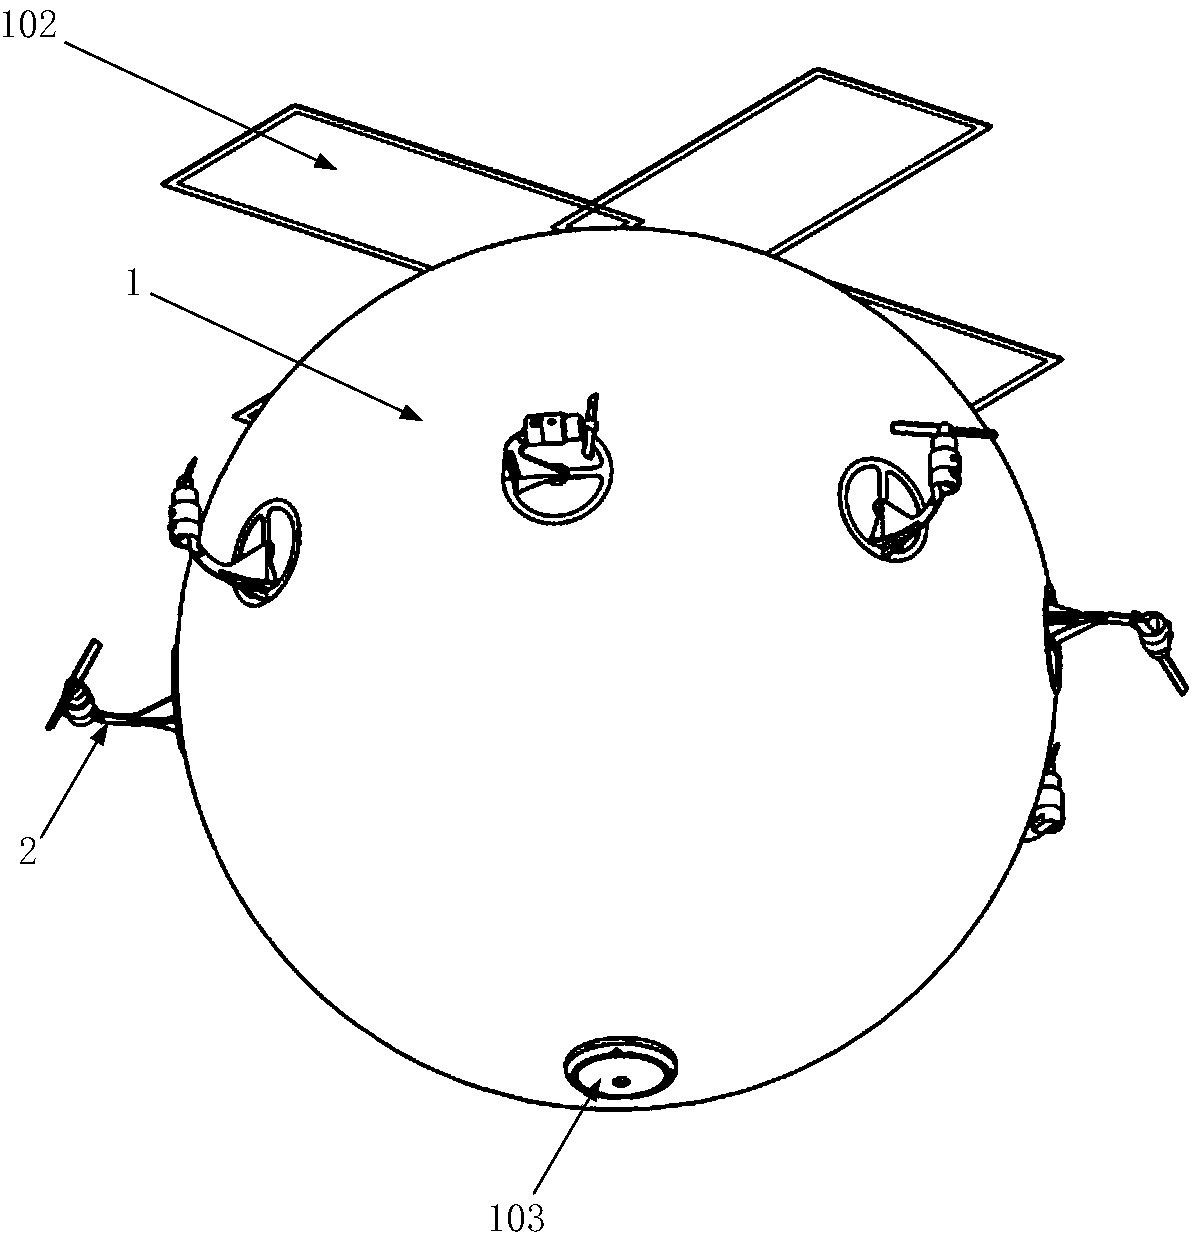 Rotor and inflatable airbag combined type floating aircraft with vectored thrust